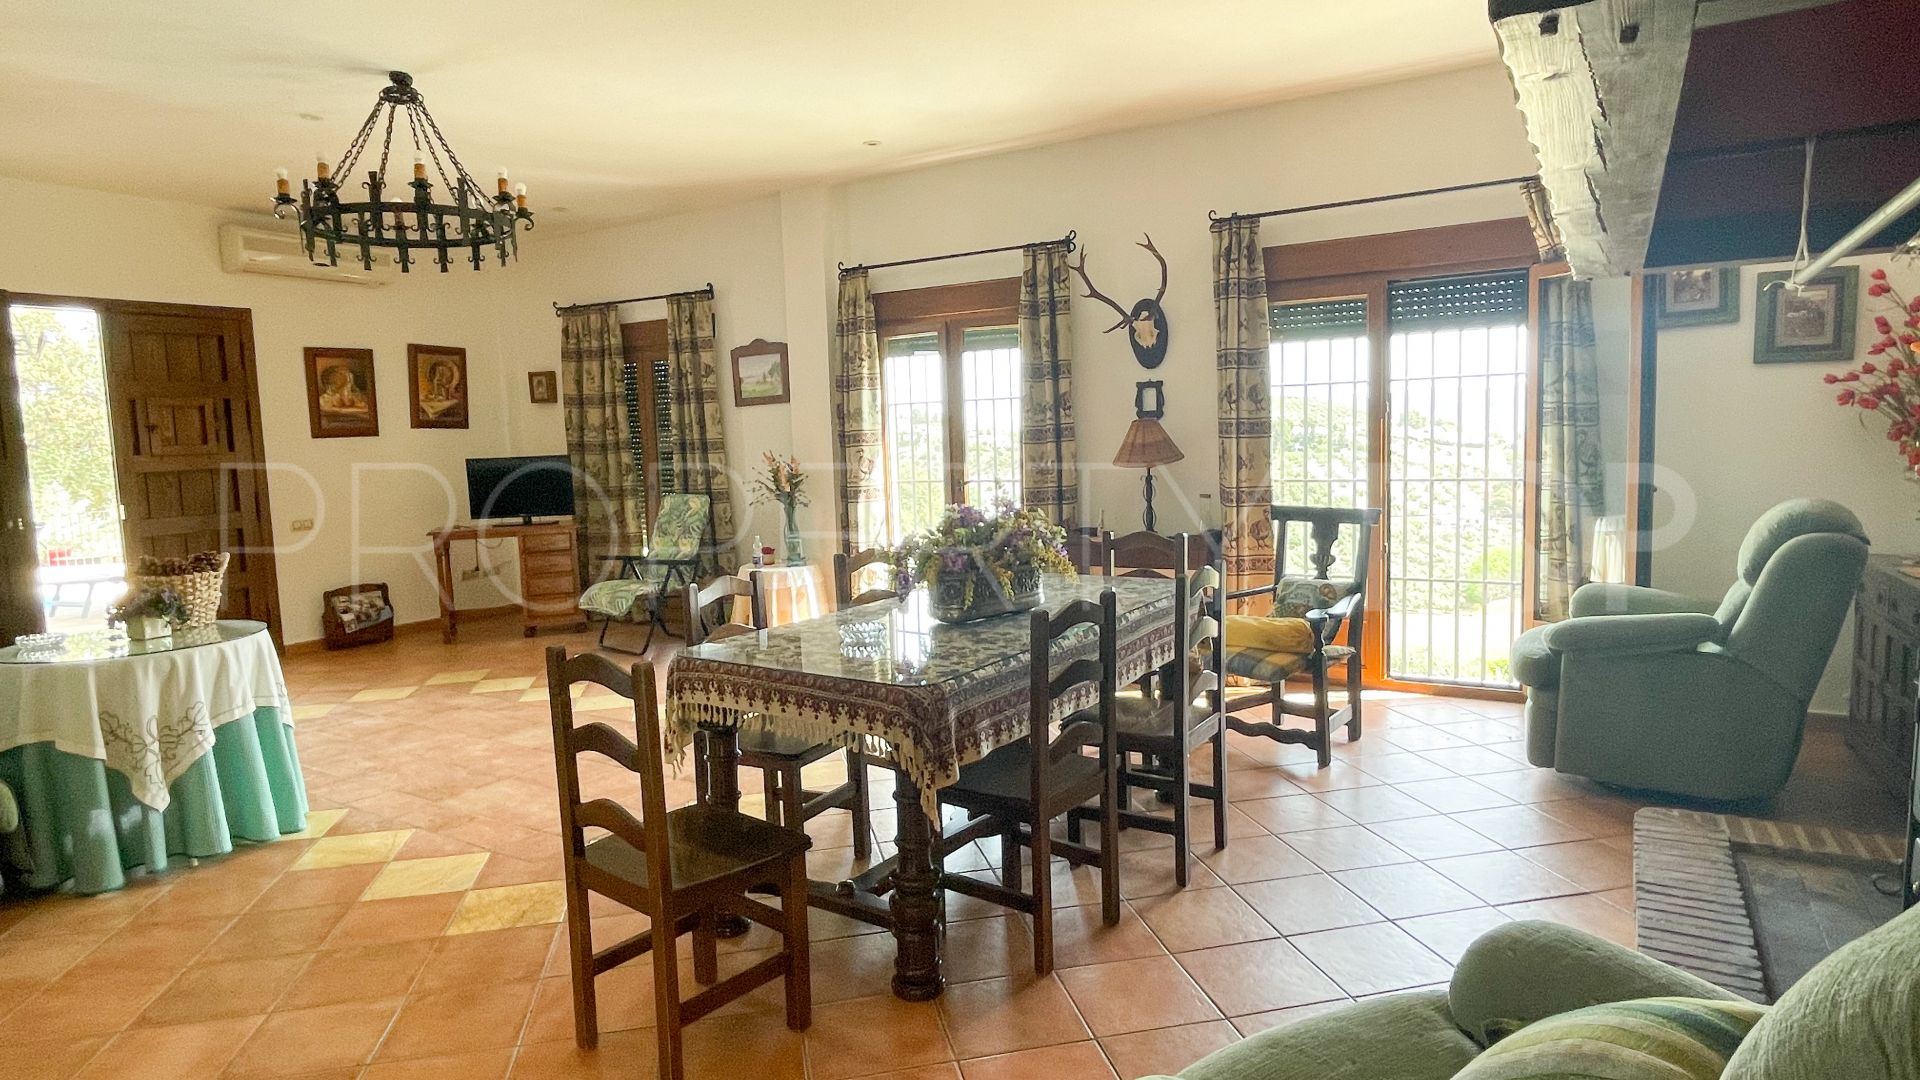 For sale country house in Priego de Cordoba